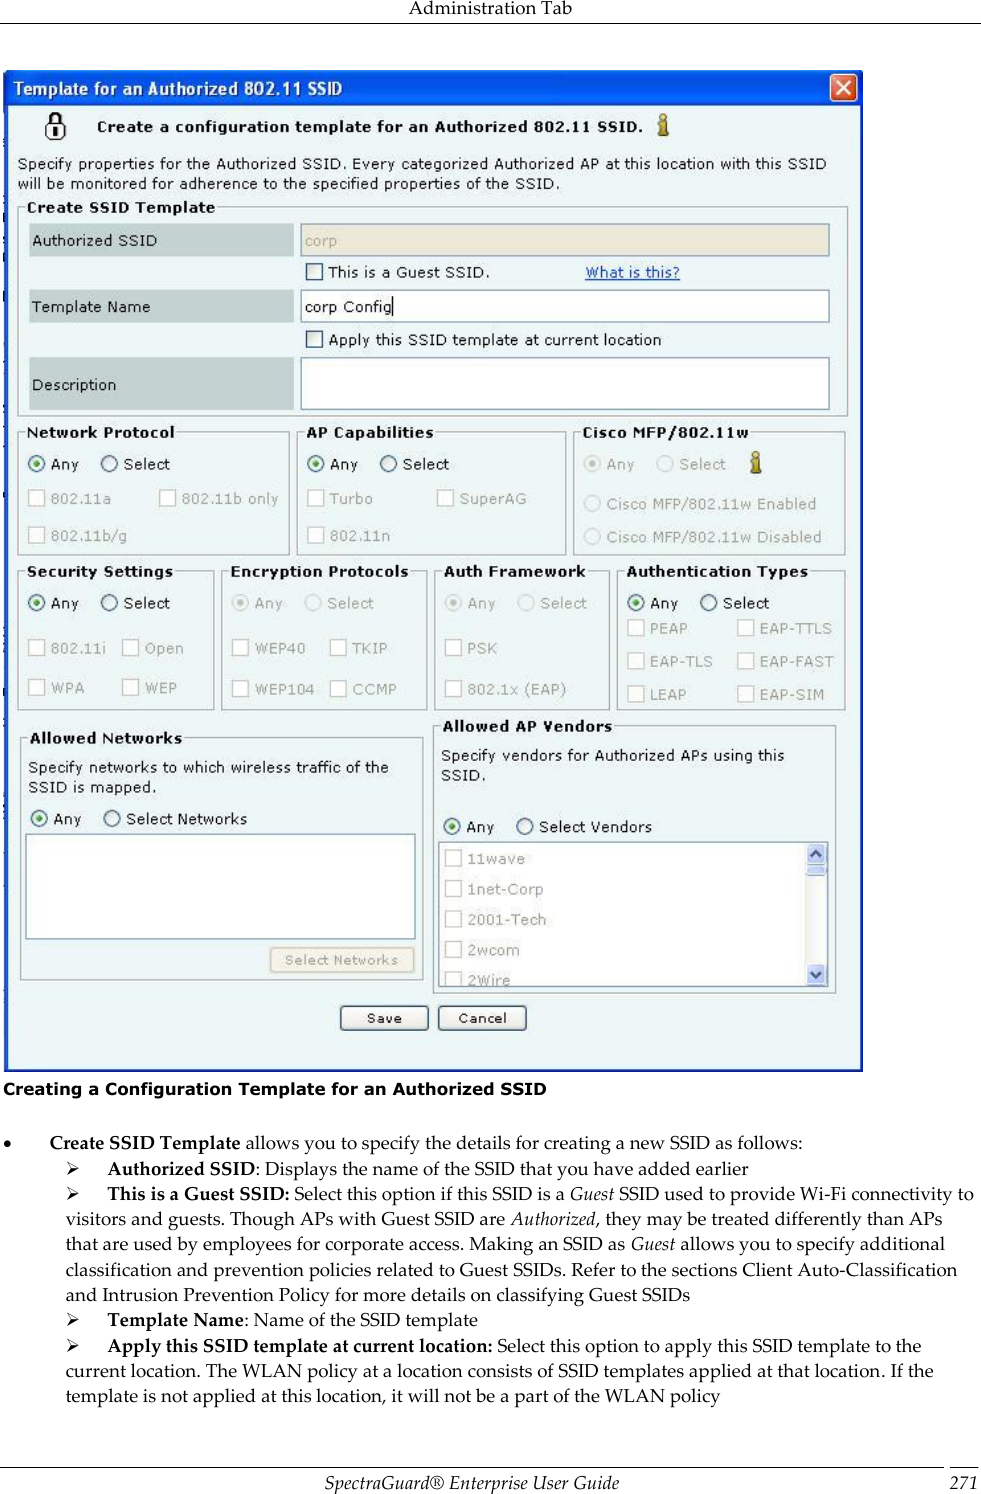 Administration Tab SpectraGuard®  Enterprise User Guide 271  Creating a Configuration Template for an Authorized SSID             Create SSID Template allows you to specify the details for creating a new SSID as follows:        Authorized SSID: Displays the name of the SSID that you have added earlier        This is a Guest SSID: Select this option if this SSID is a Guest SSID used to provide Wi-Fi connectivity to visitors and guests. Though APs with Guest SSID are Authorized, they may be treated differently than APs that are used by employees for corporate access. Making an SSID as Guest allows you to specify additional classification and prevention policies related to Guest SSIDs. Refer to the sections Client Auto-Classification and Intrusion Prevention Policy for more details on classifying Guest SSIDs        Template Name: Name of the SSID template        Apply this SSID template at current location: Select this option to apply this SSID template to the current location. The WLAN policy at a location consists of SSID templates applied at that location. If the template is not applied at this location, it will not be a part of the WLAN policy 